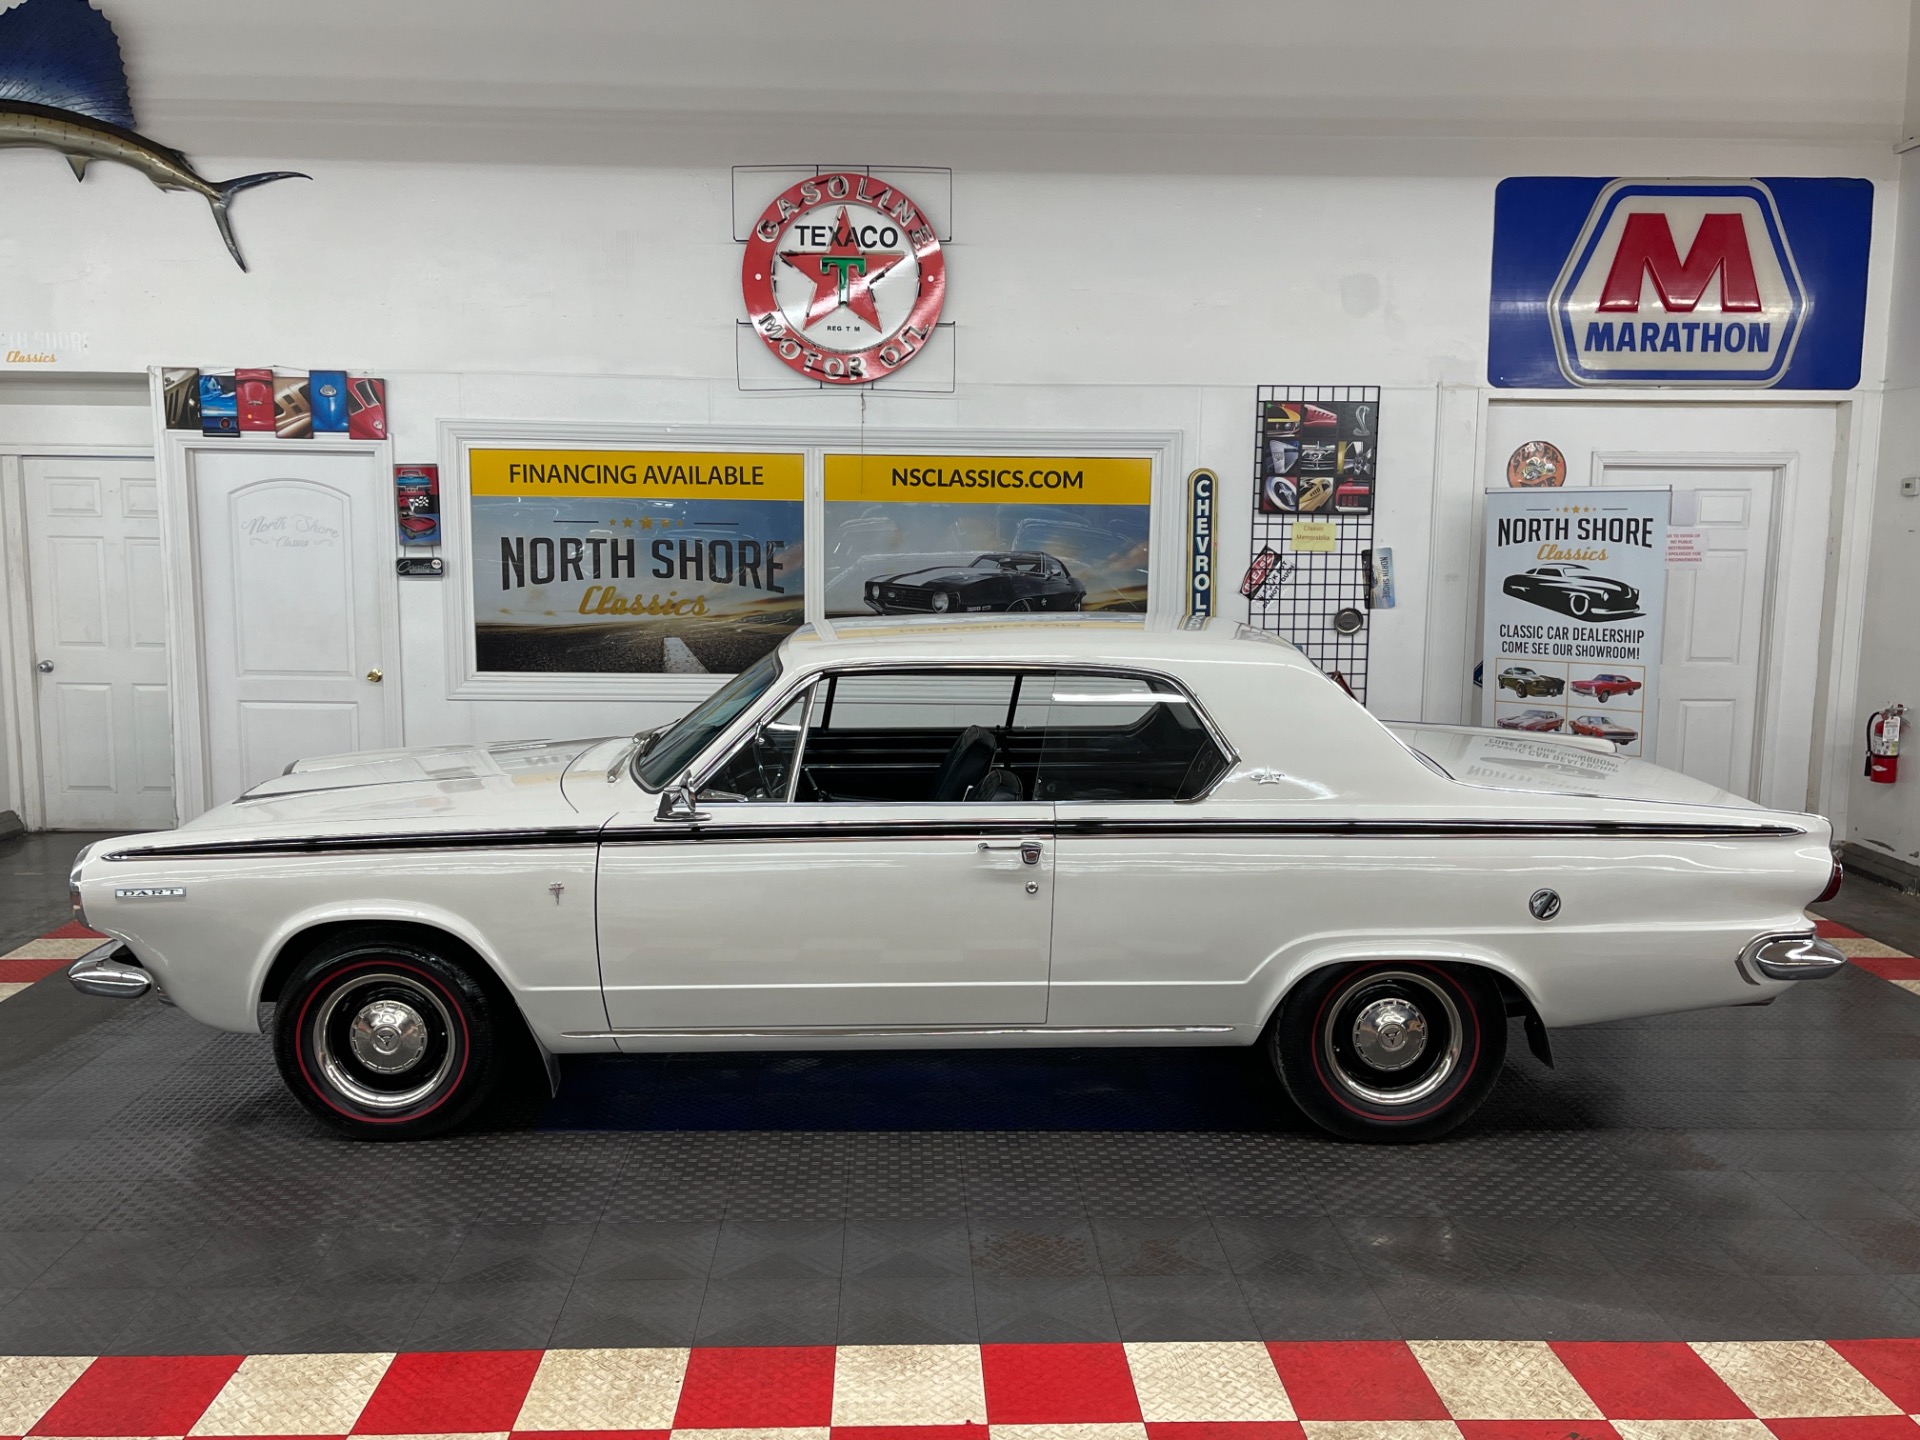 Used 1964 Dodge Dart - GT 273 V8 ENGINE - VERY CLEAN - DRIVES